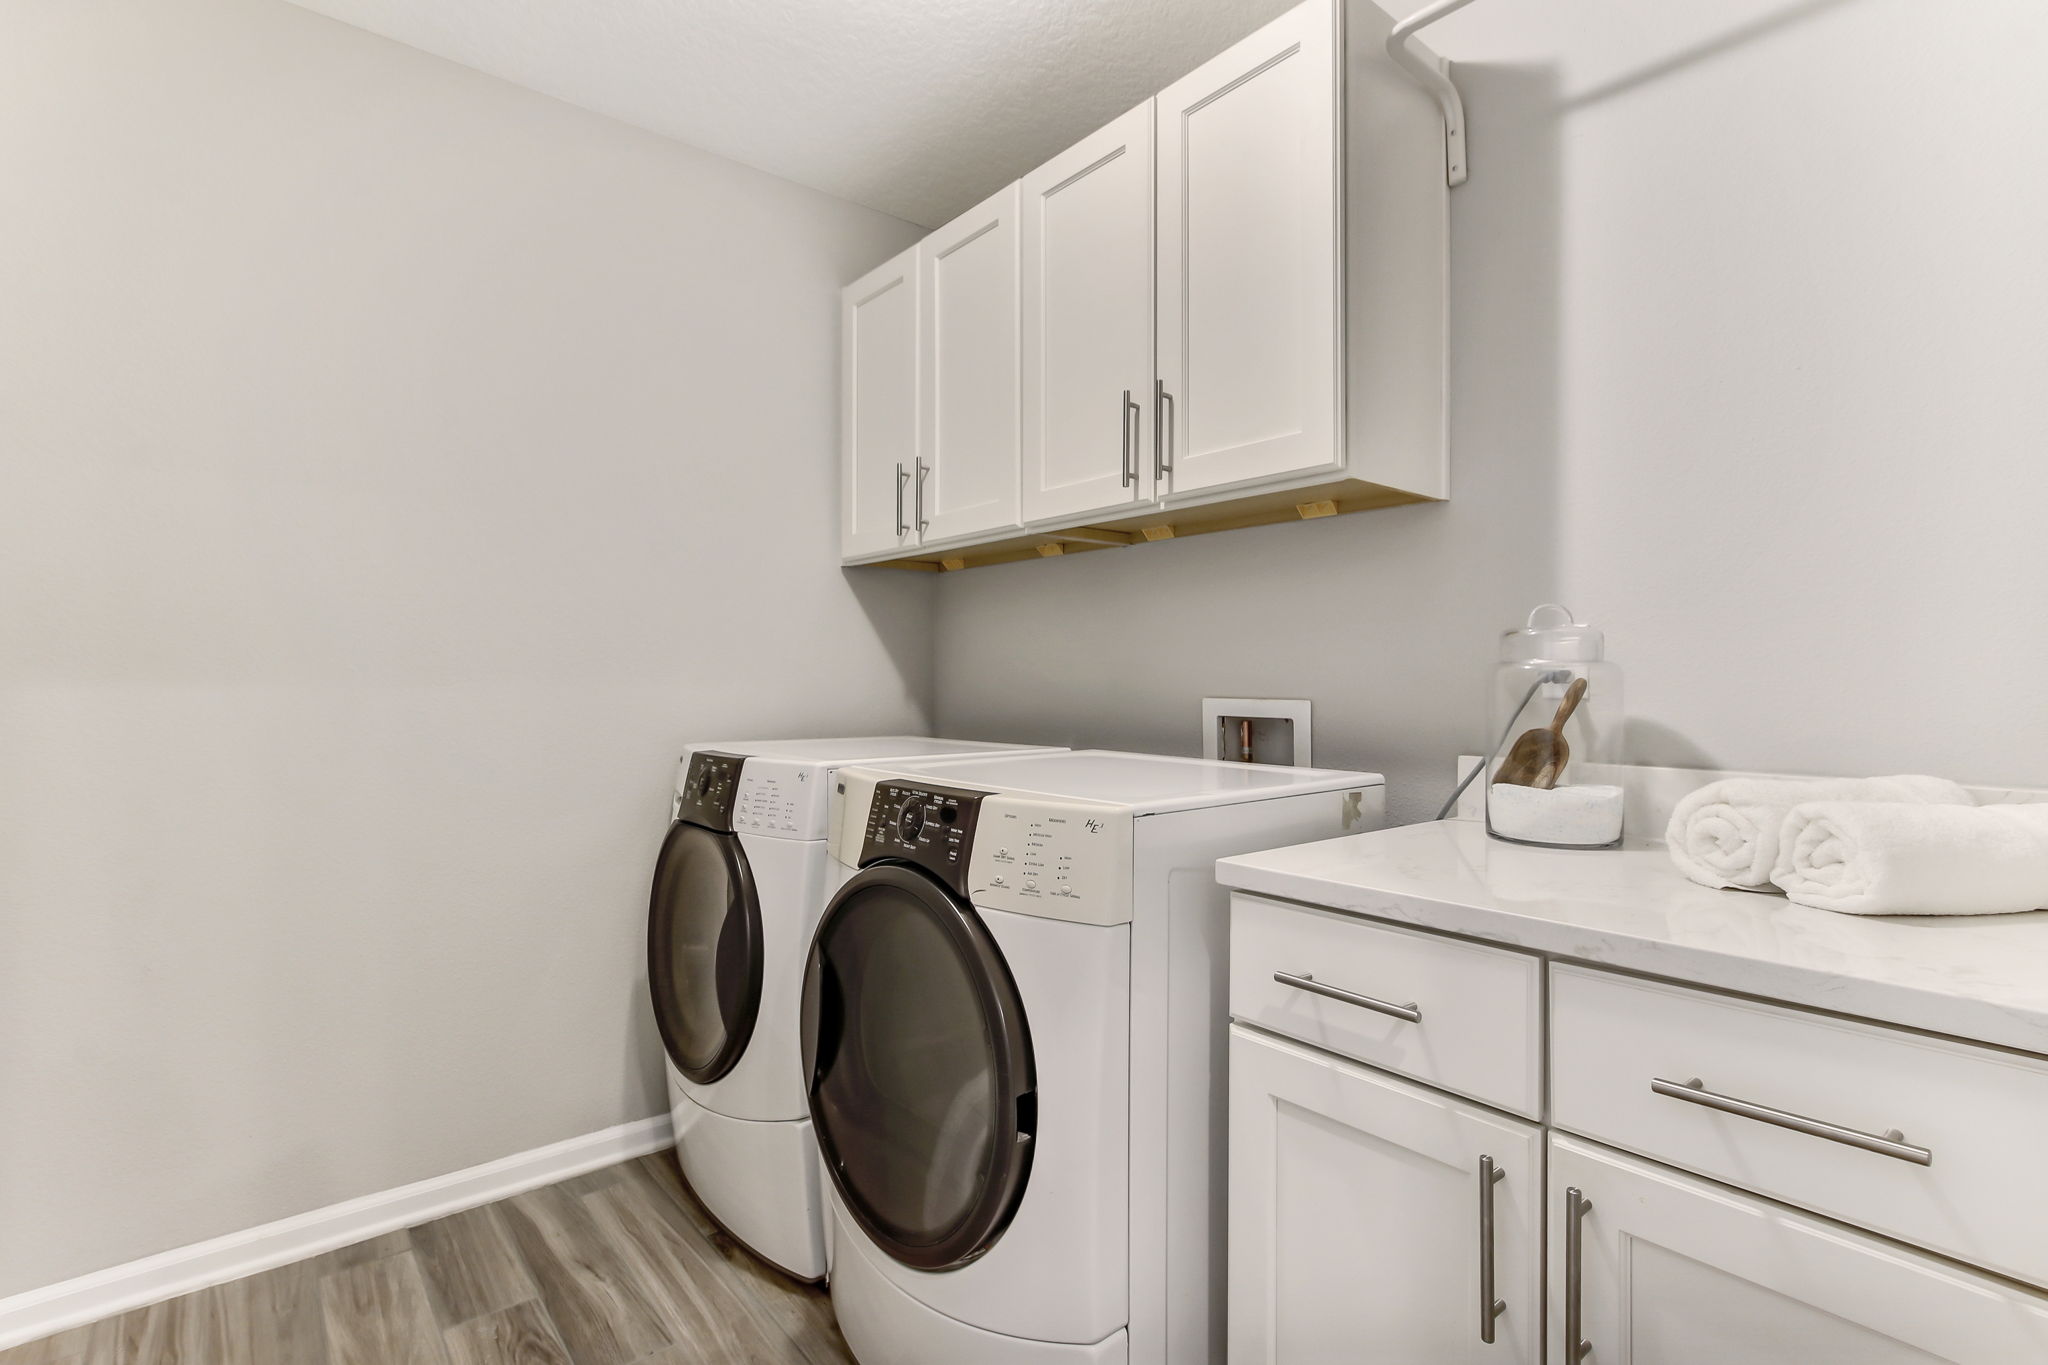 Laundry Room with built-in, washer and dryer included.